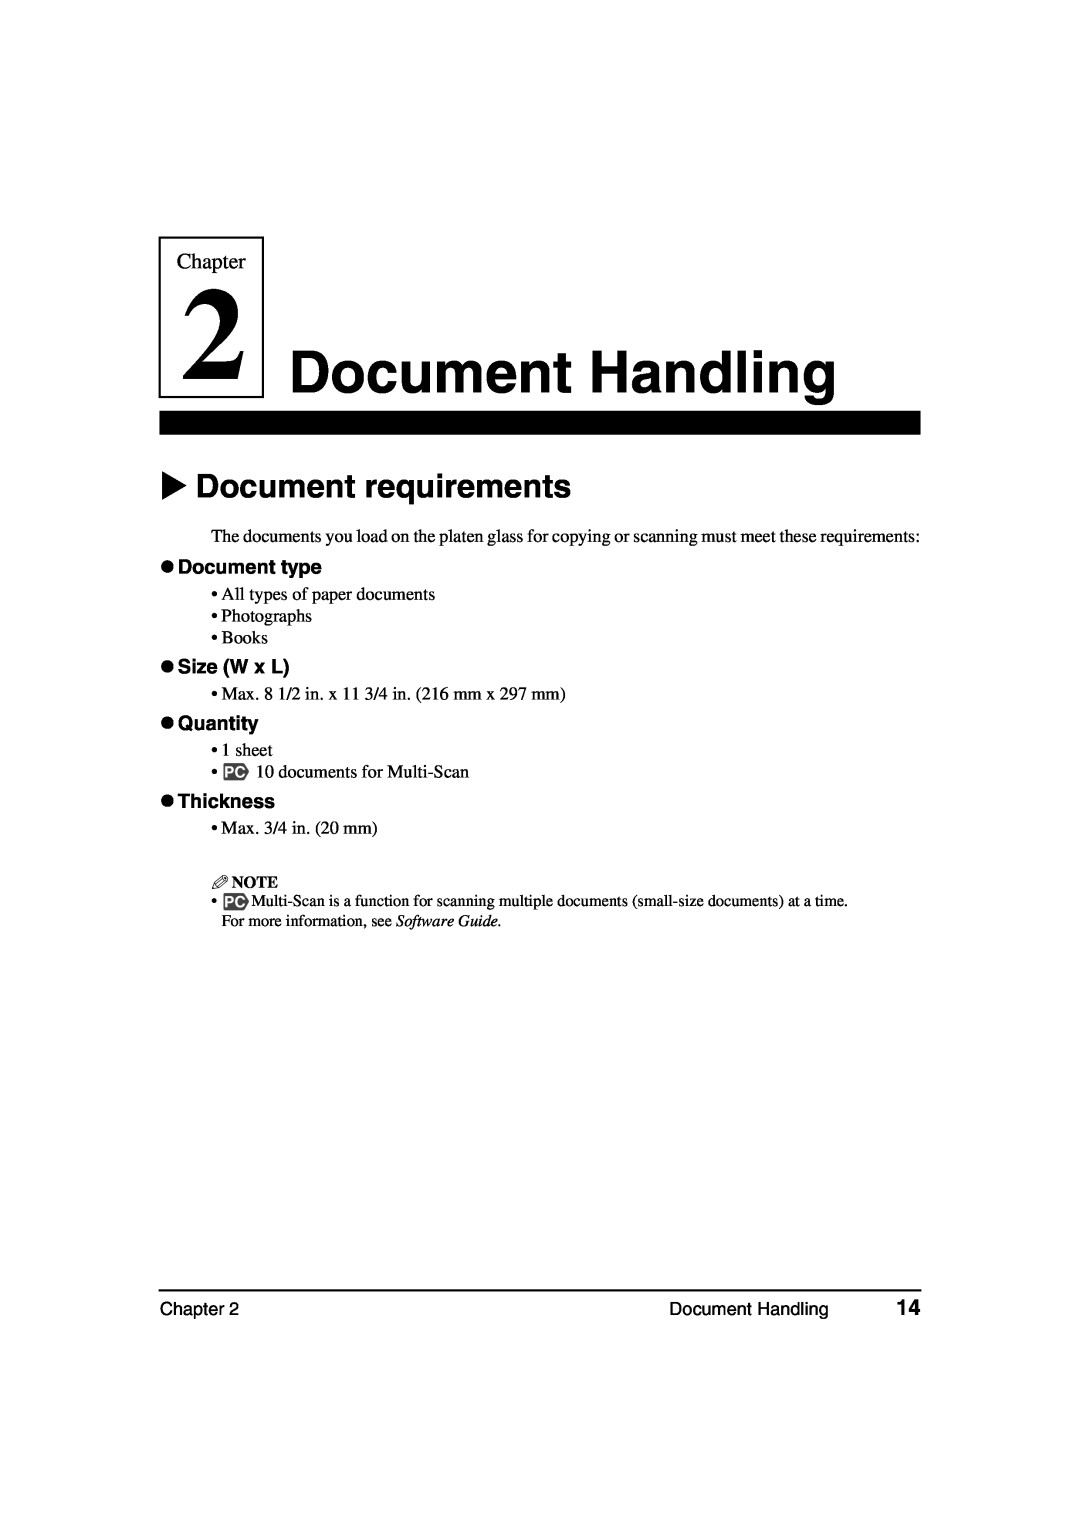 Canon MP360 Document Handling, Document requirements, z Document type, z Size W x L, z Quantity, z Thickness, Chapter 